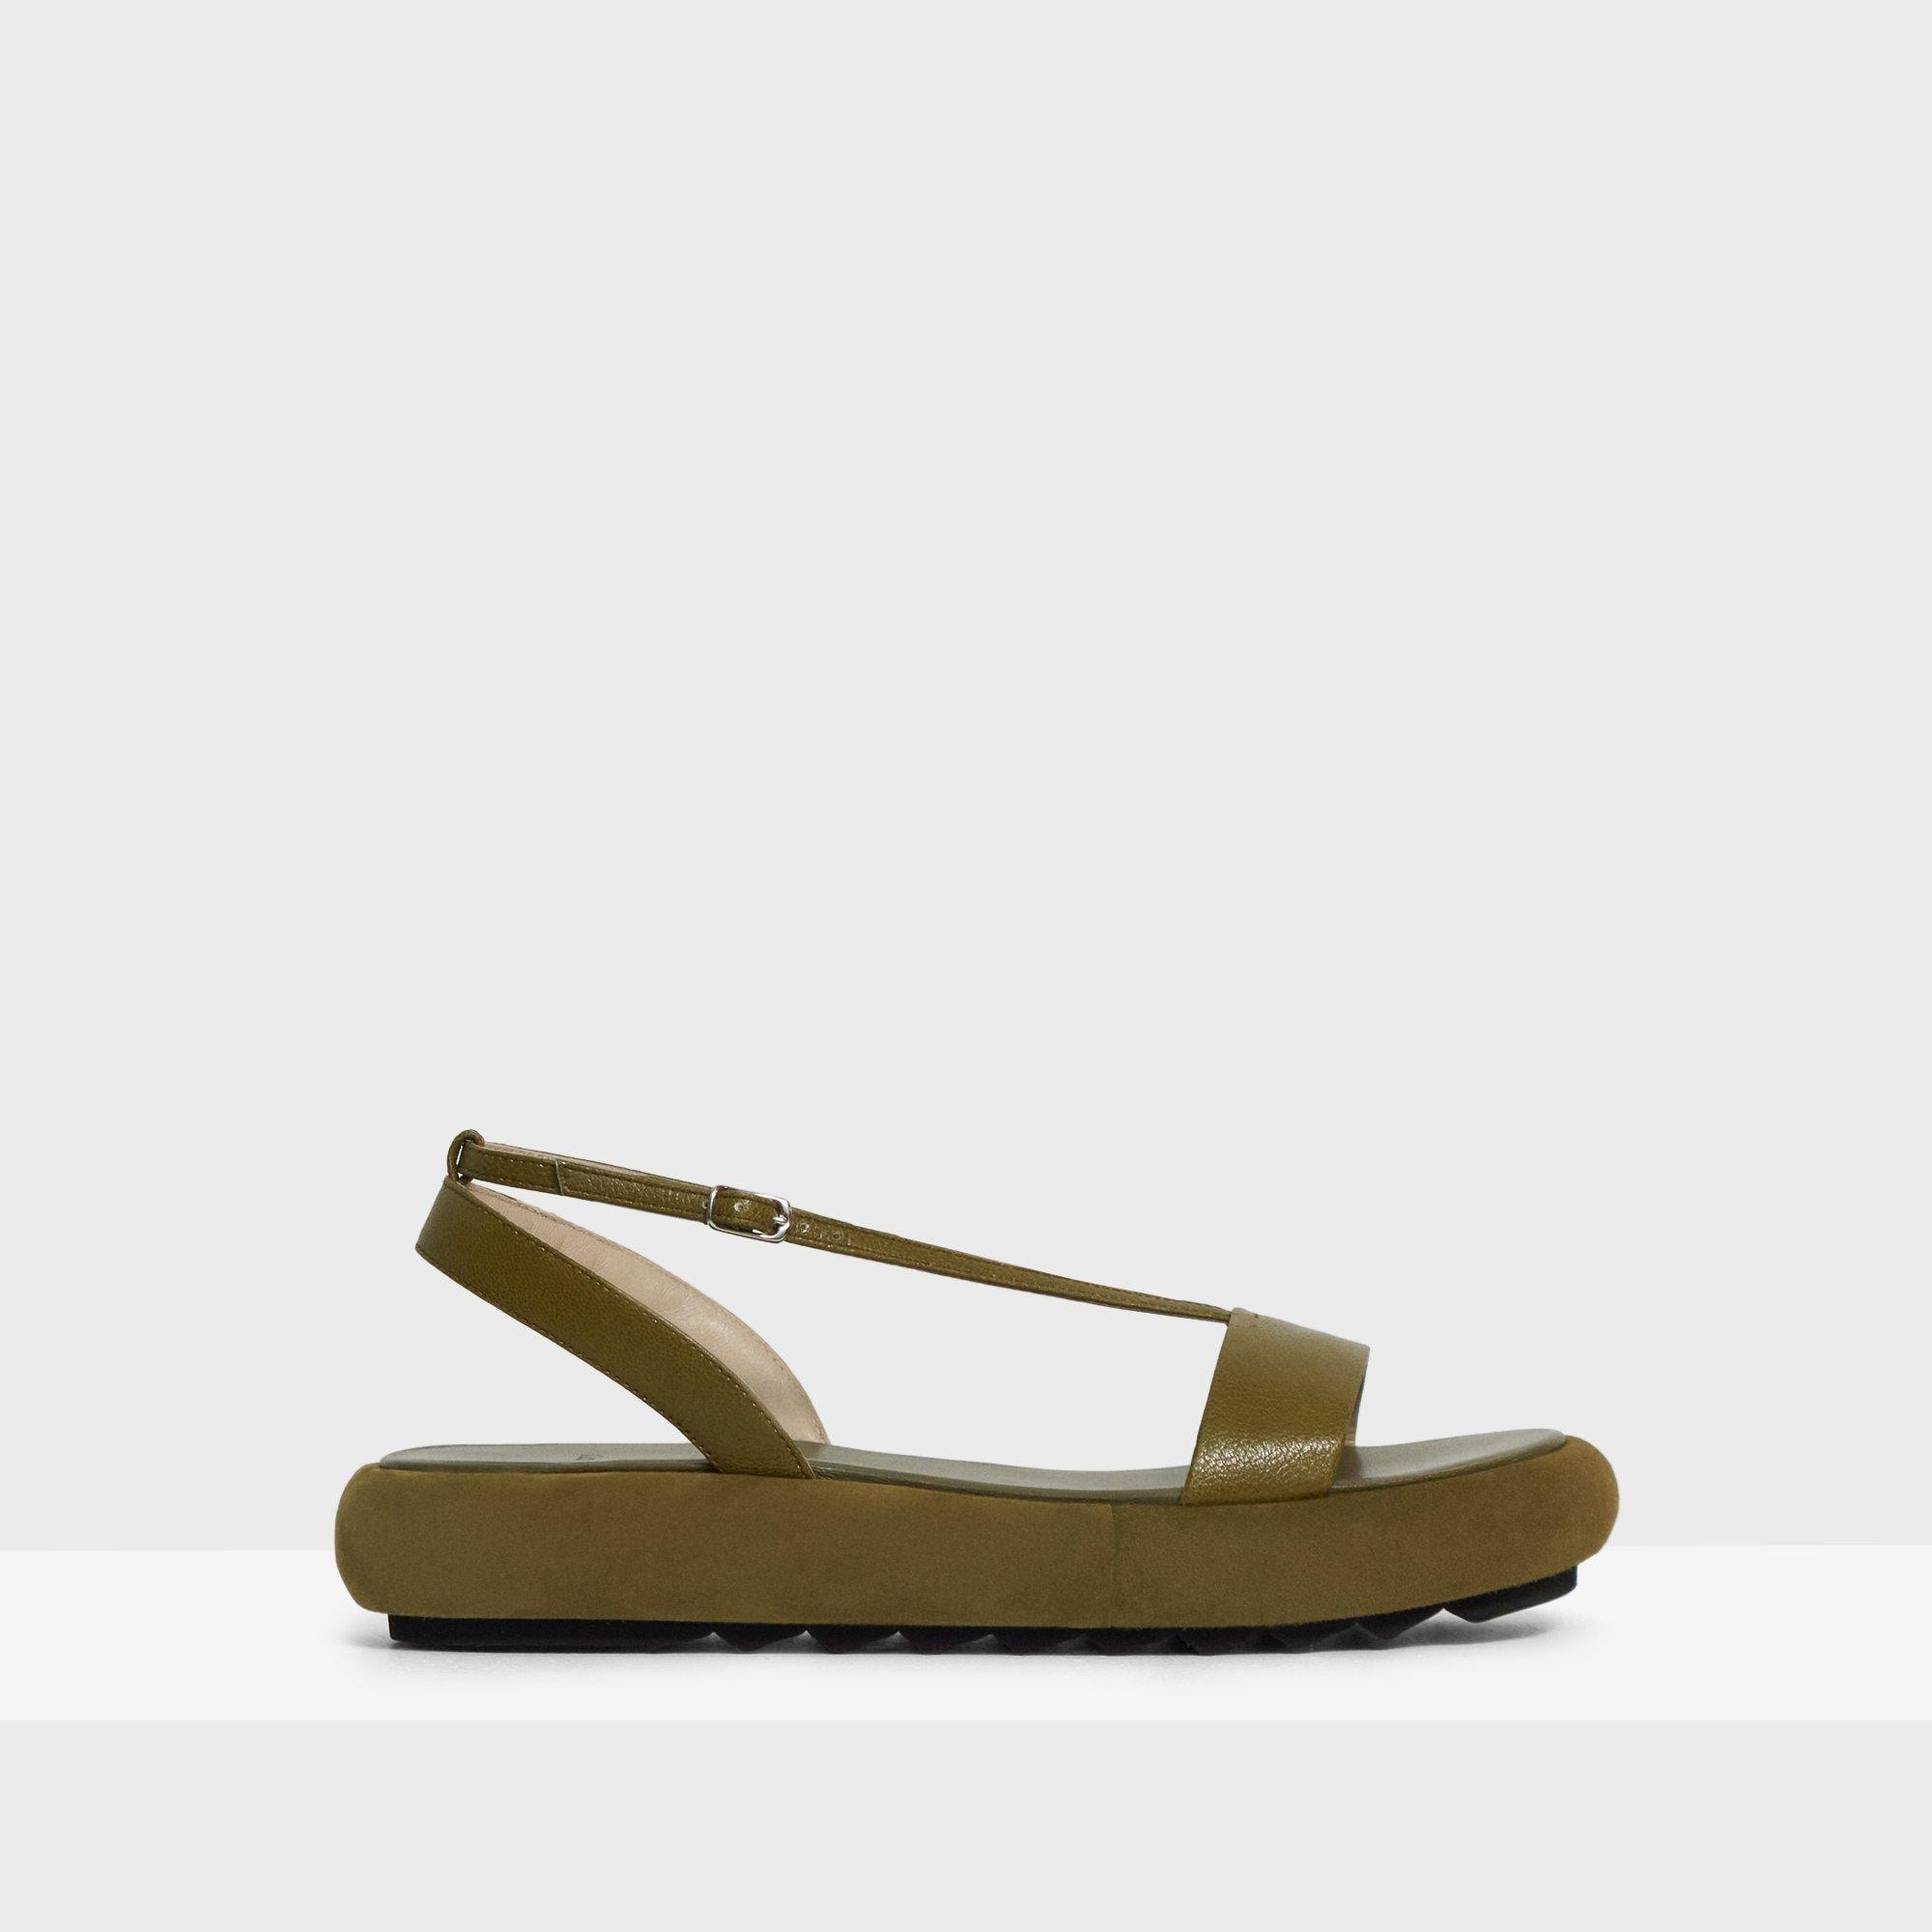 Theory Donut Platform Sandal in Leather